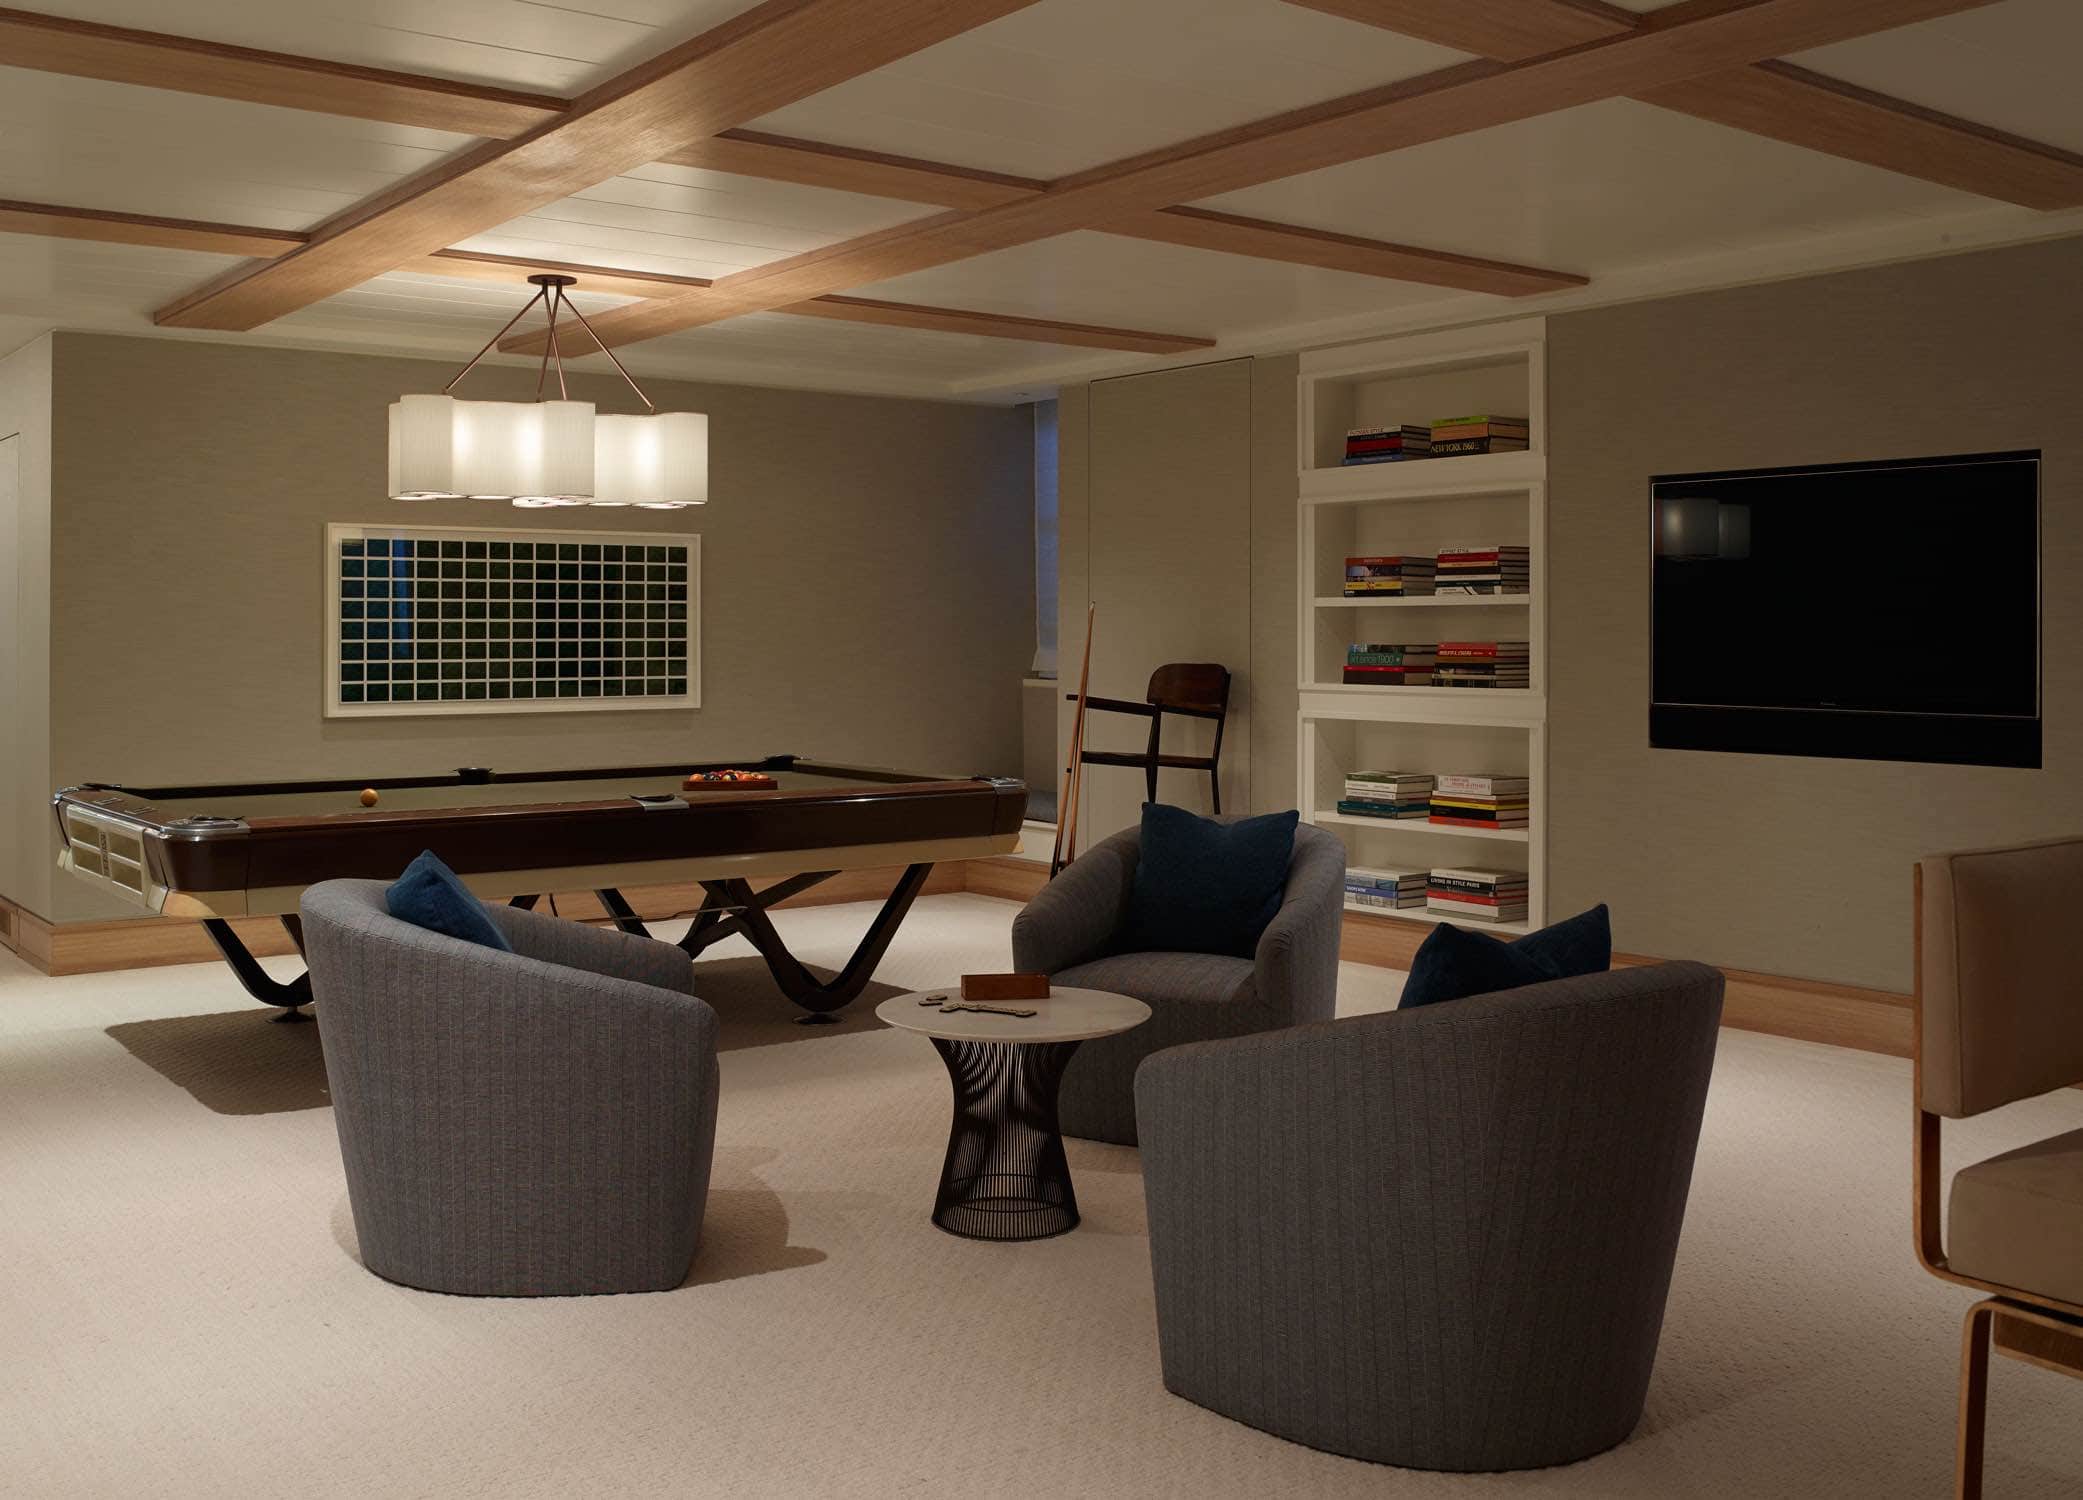 This image shows a games room designed by Carol Egan with a vintage pool table.  The pool table is lit by a ""Linear Cumulus"" pendant fixture by Ted Abramczyk.  The walls are upholstered in a taupe fabric and the ceiling is accented with a shaker oak and painted white wooden grid. Three swivel armchairs that are upholstered in a black and white woven fabric sit on a Custom ramie & wool ""Cuddles ll"" flat weave area rug by Mitchell Denberg.